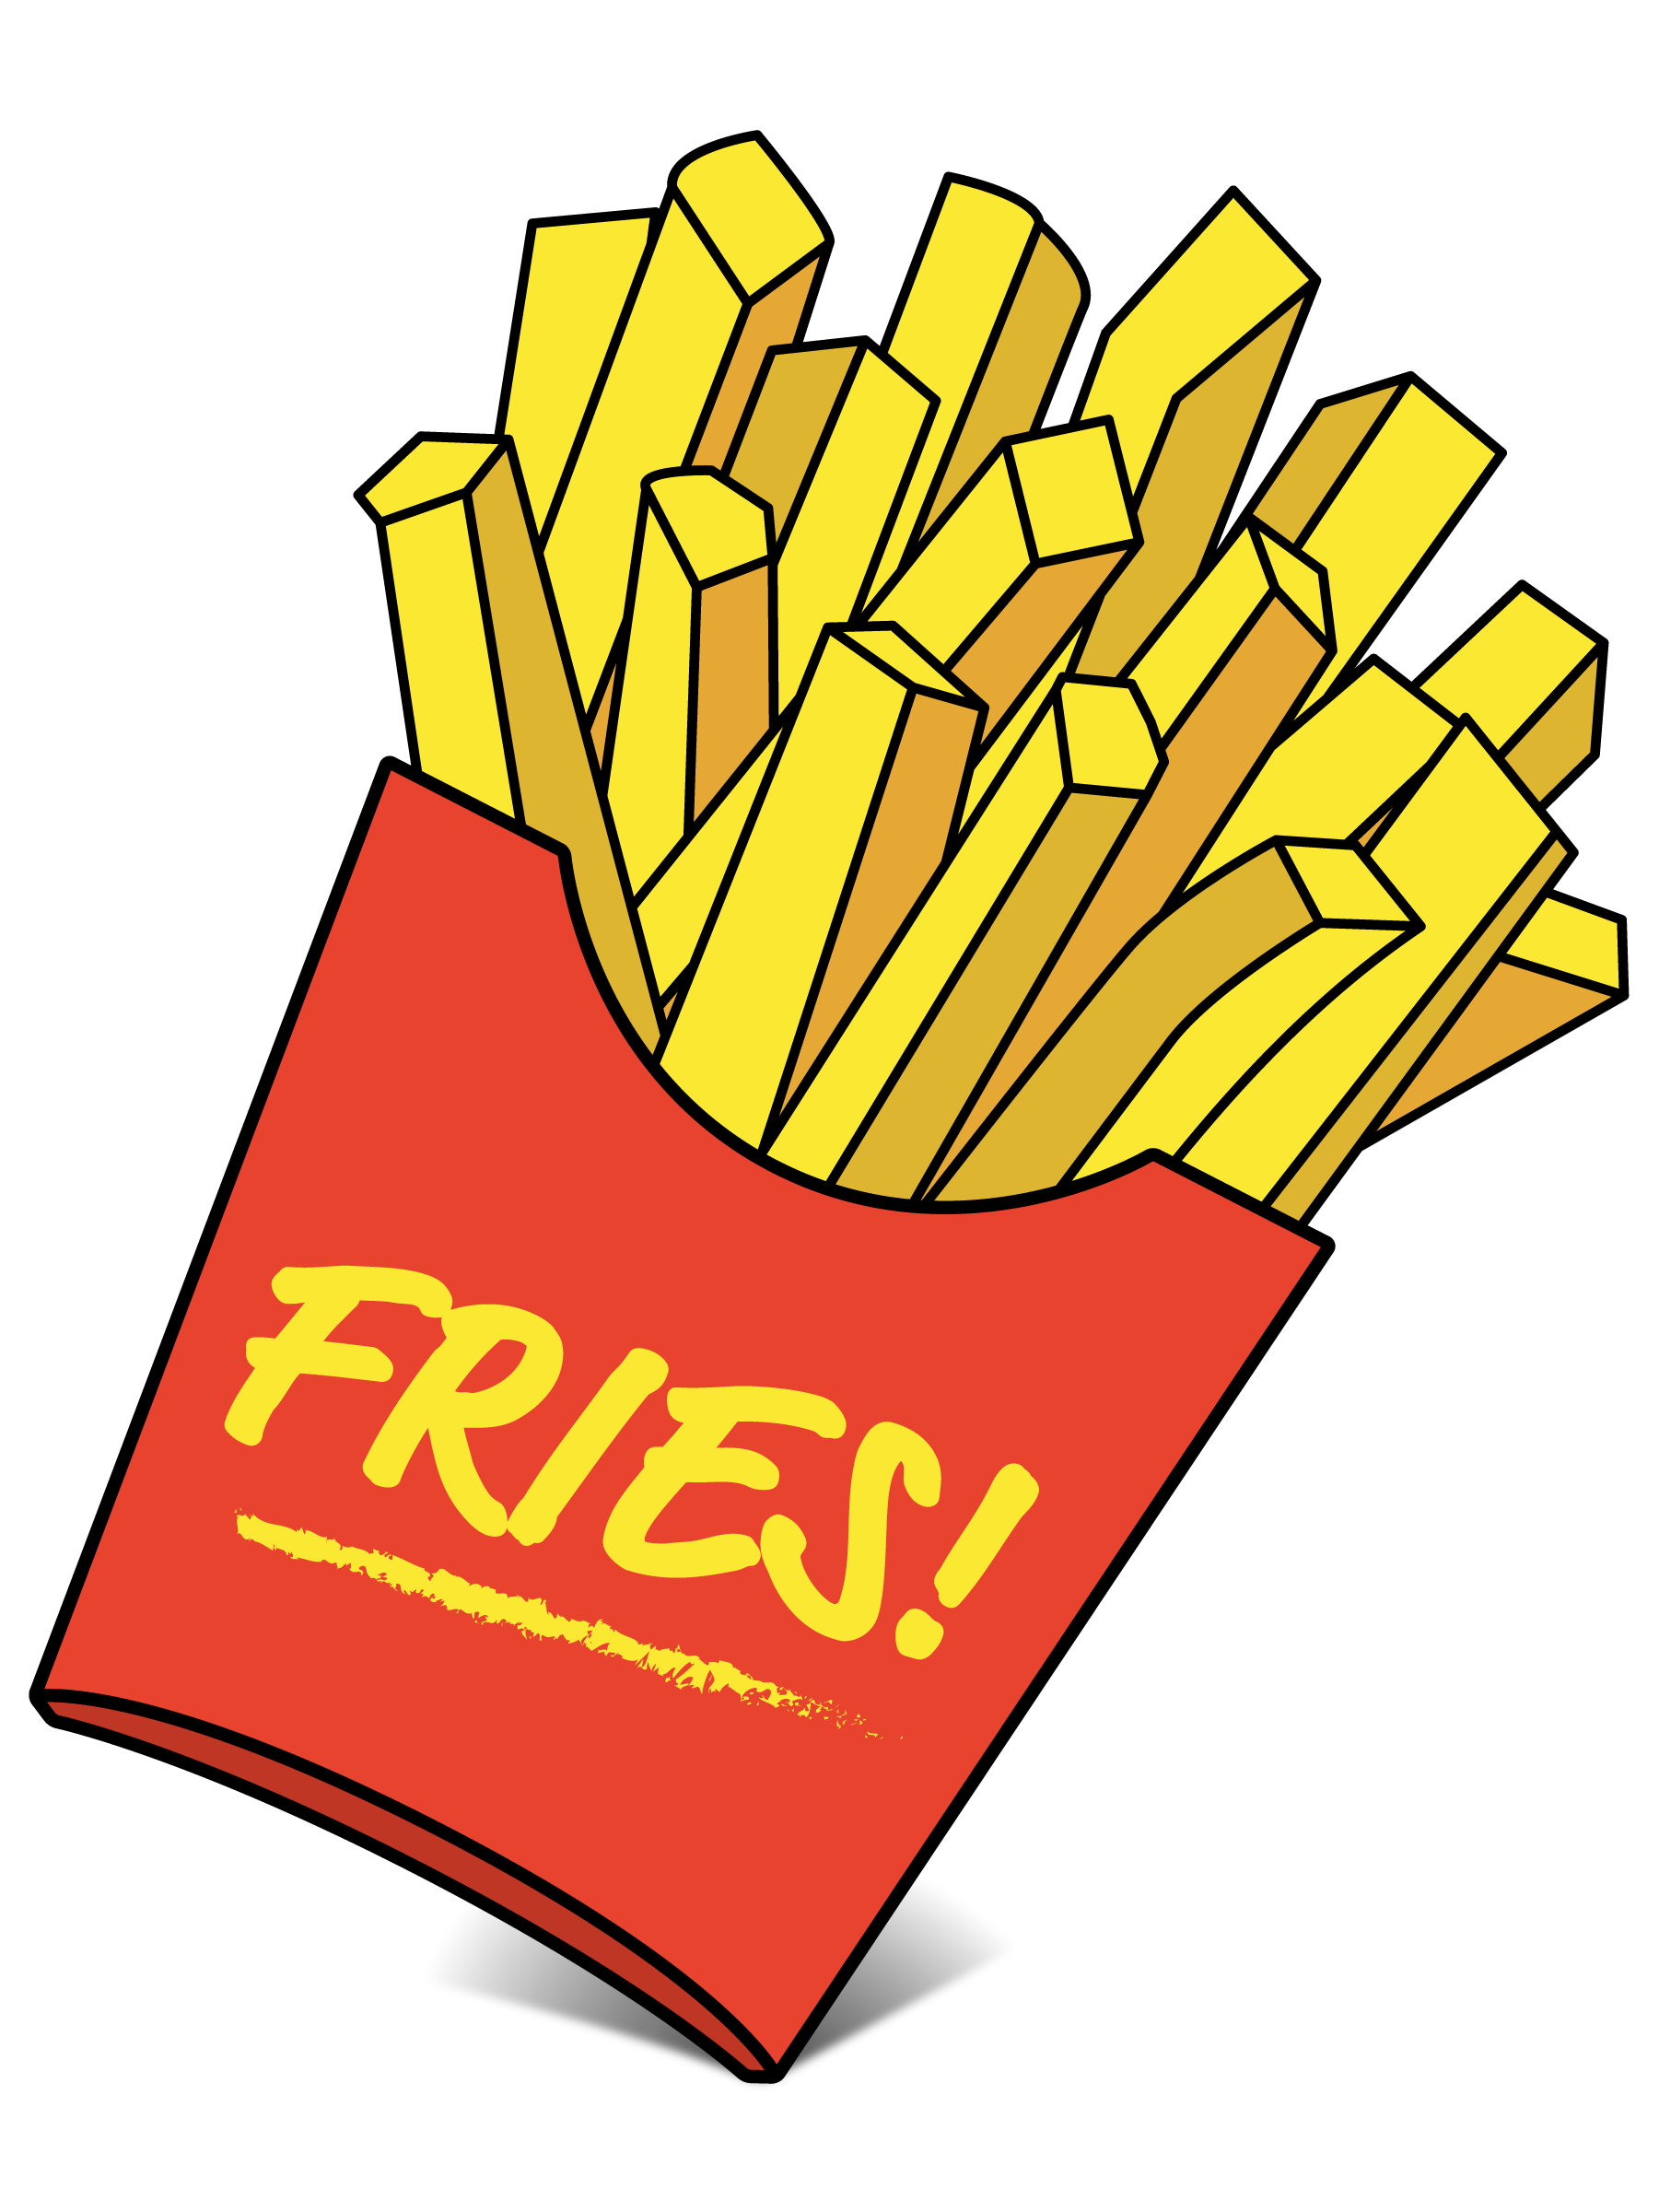 Fries clipart fast food bag, Fries fast food bag Transparent FREE for